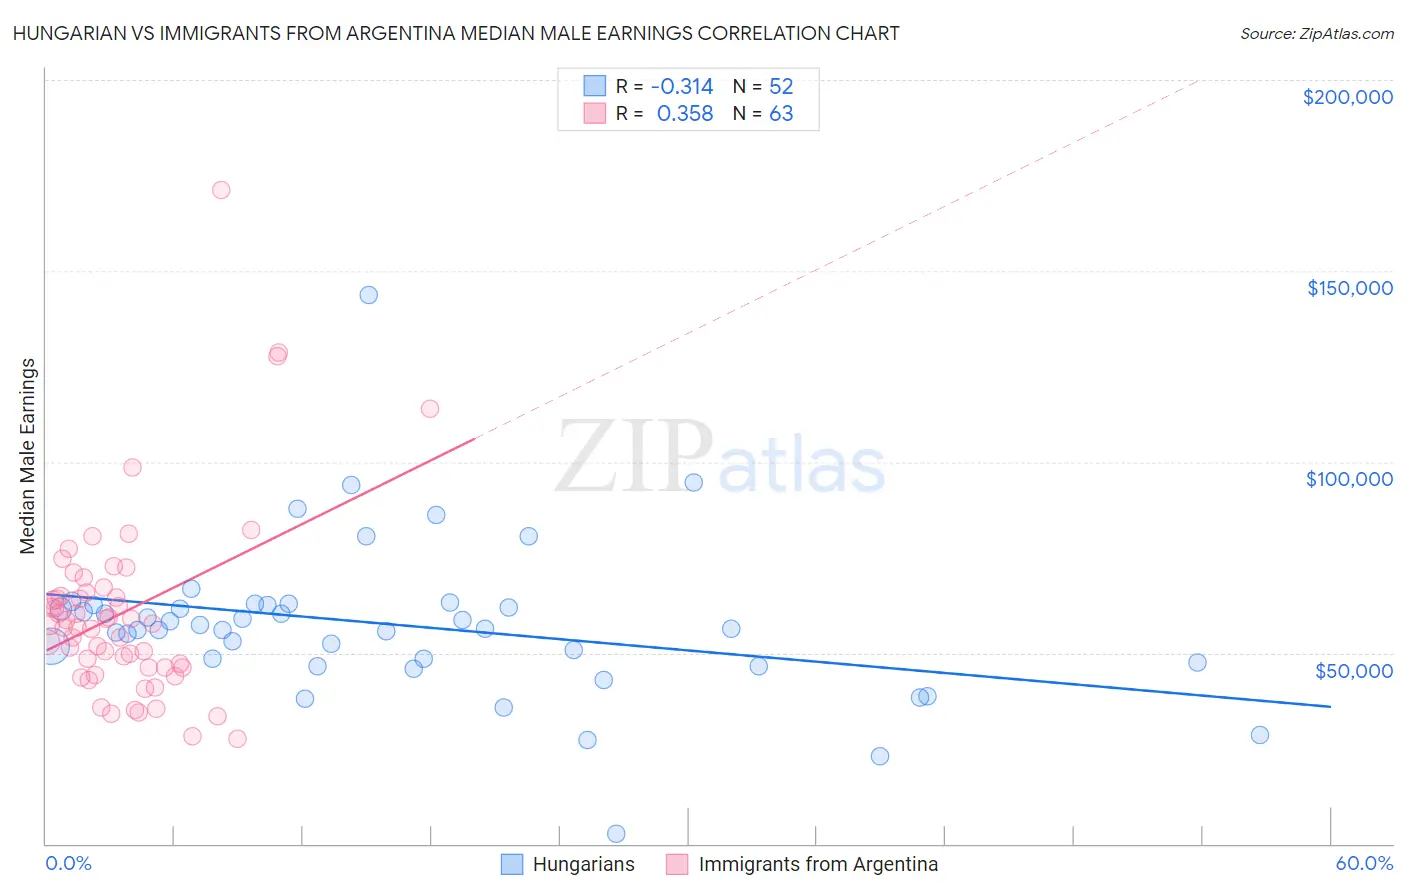 Hungarian vs Immigrants from Argentina Median Male Earnings